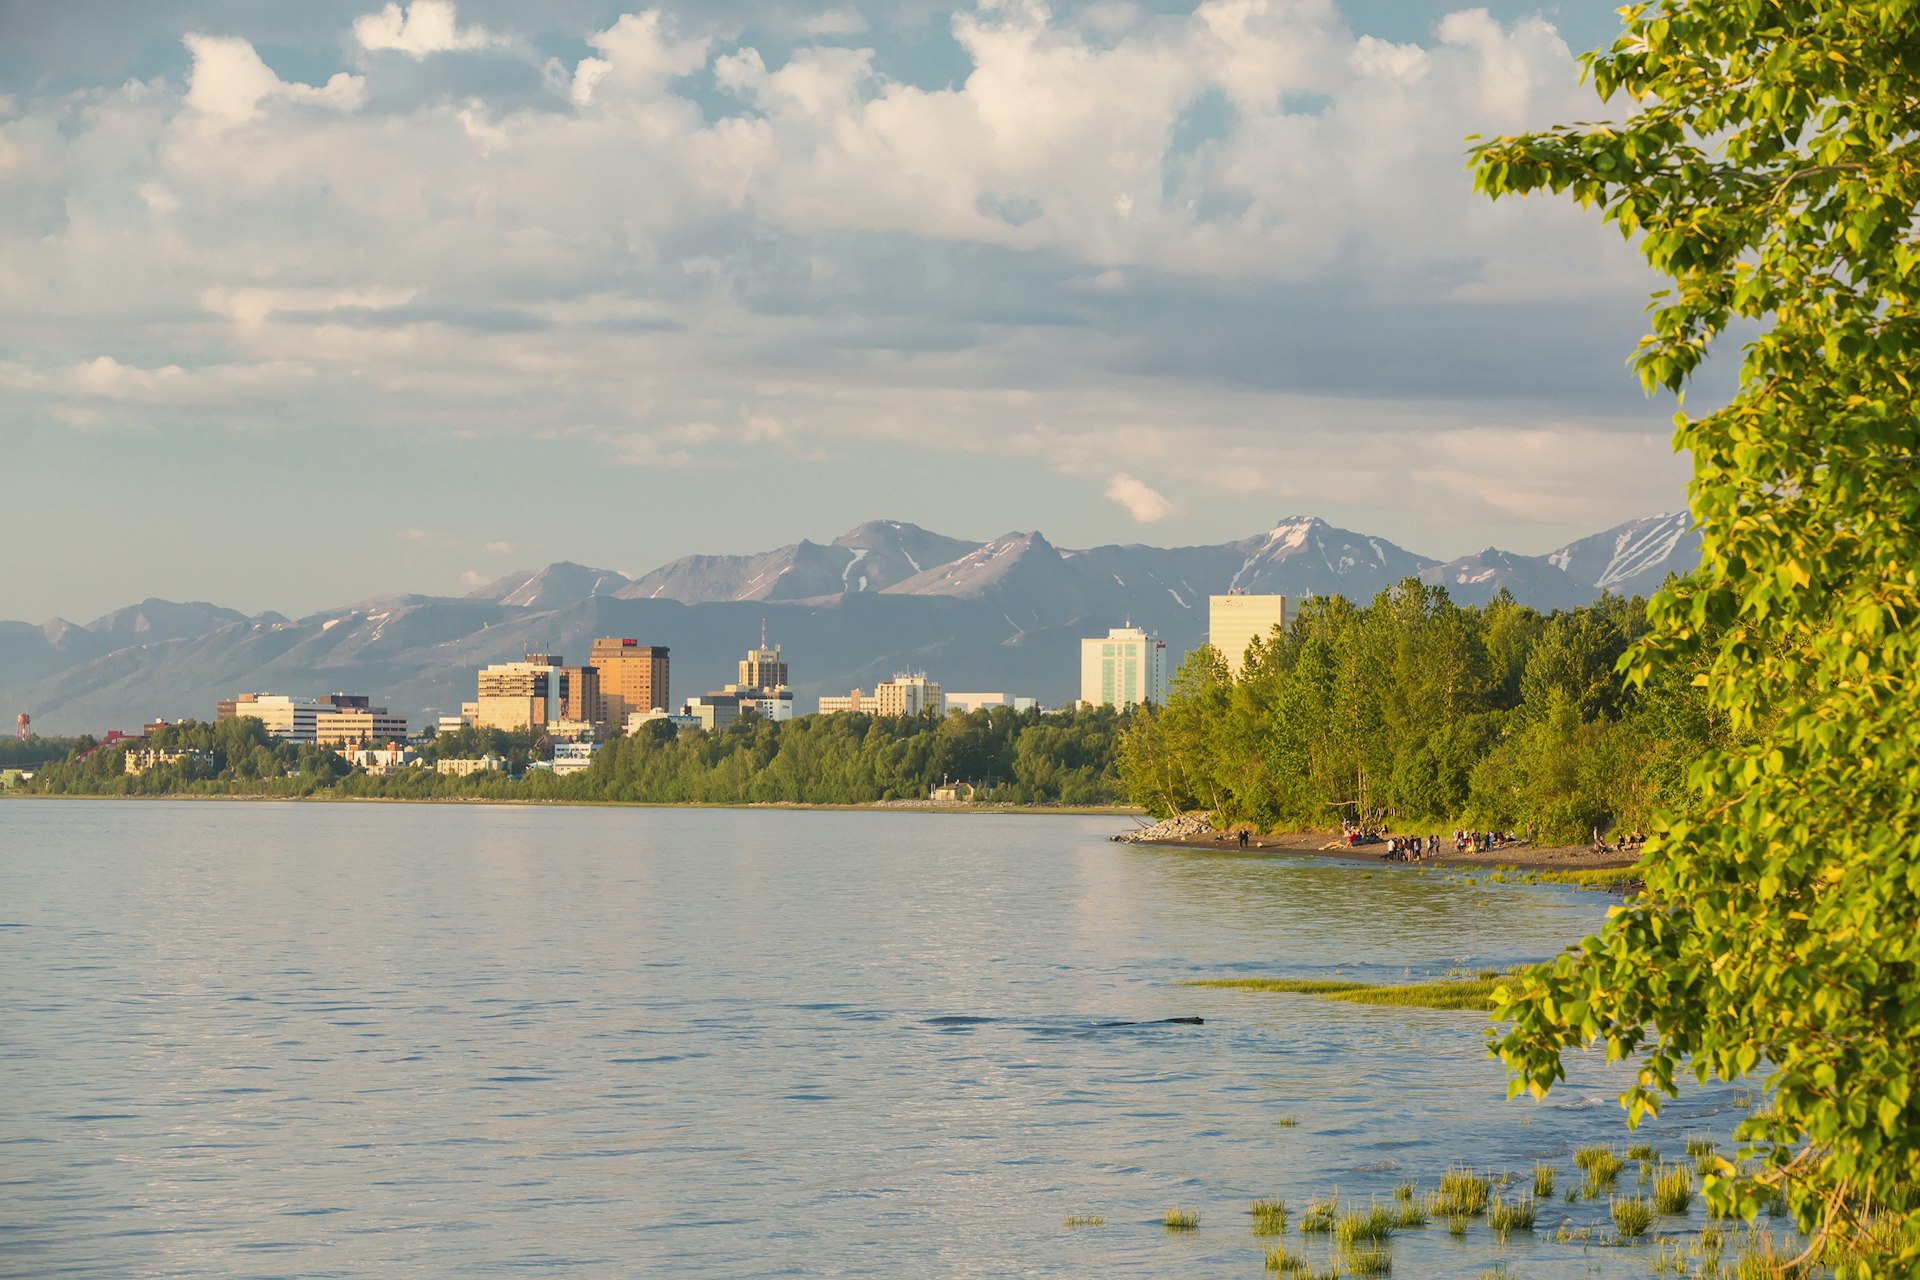 Anchorage city skyline seen from the Tony Knowles Coastal Trail during high tide with mountains in the background